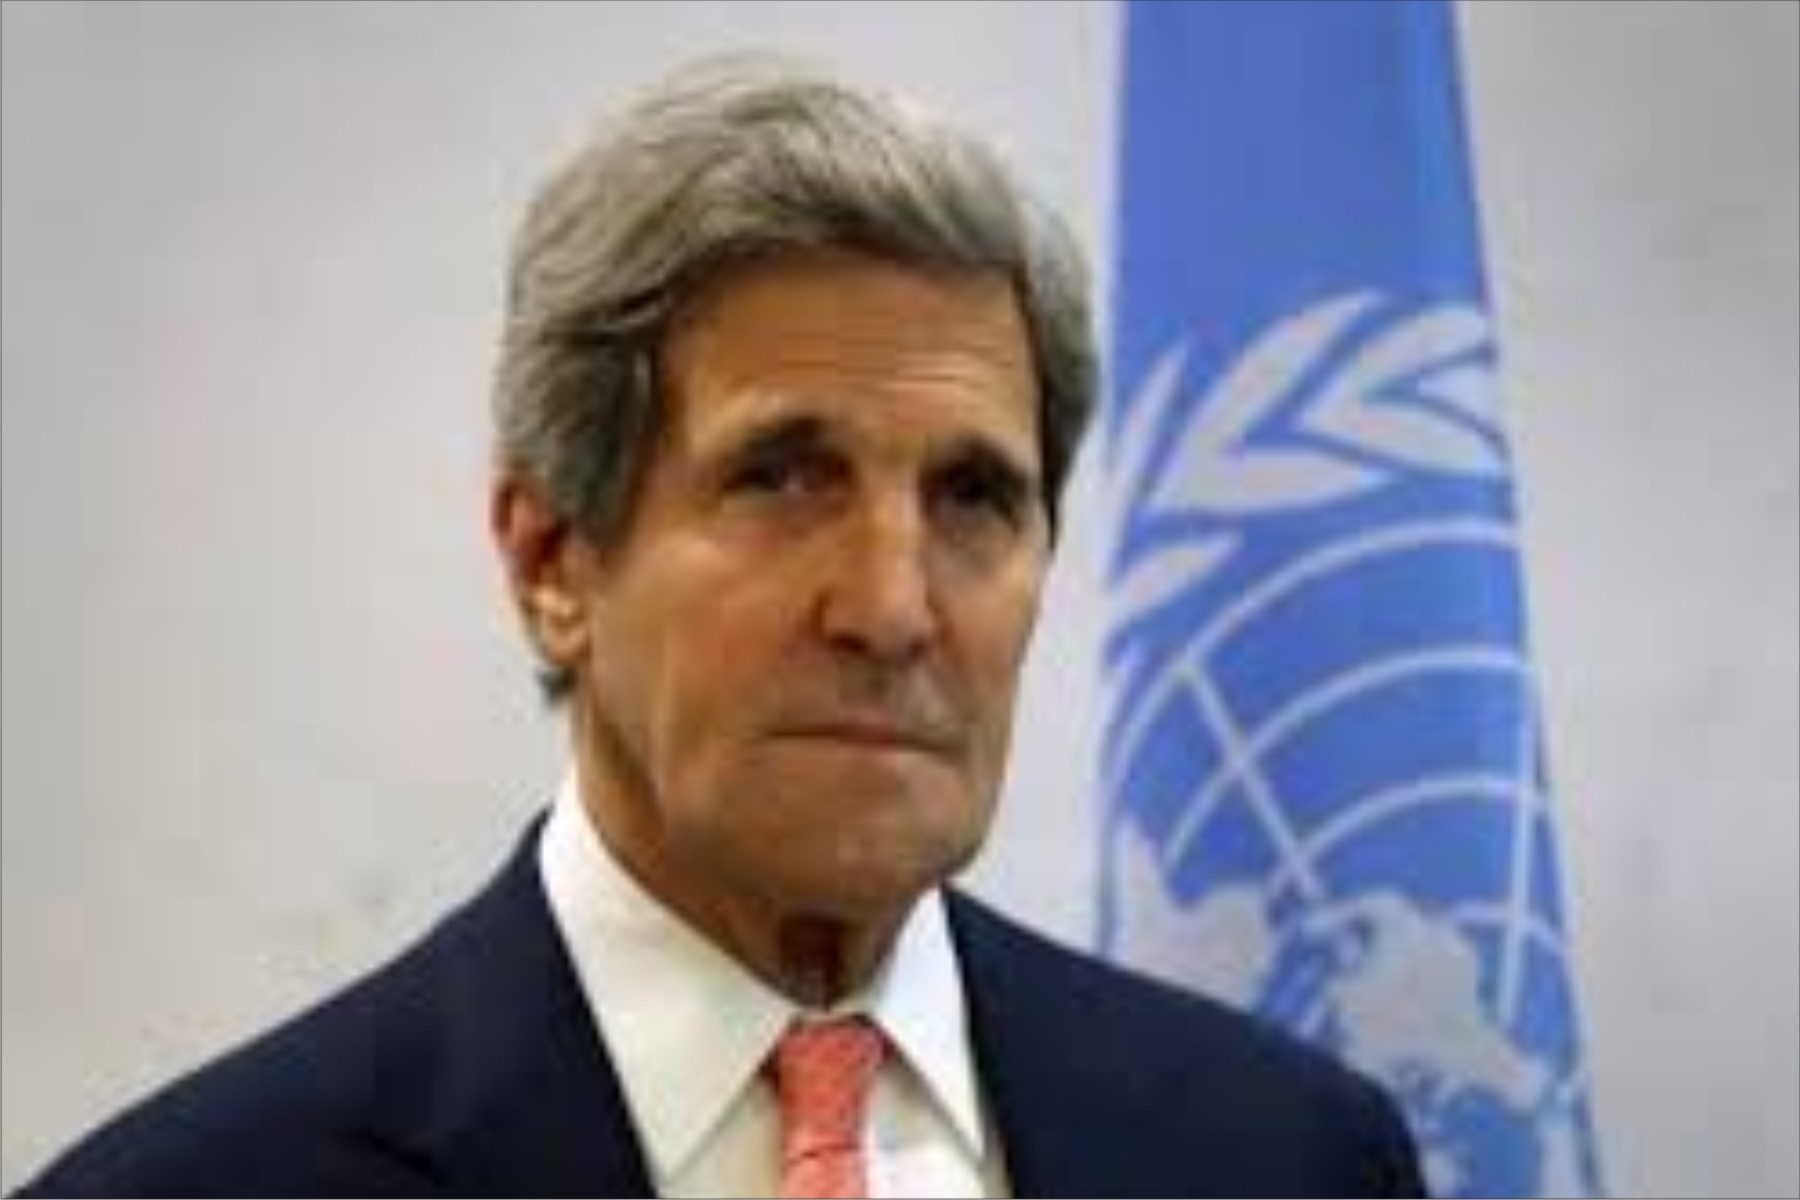 SL is among the significant successes of UNHRC: Kerry